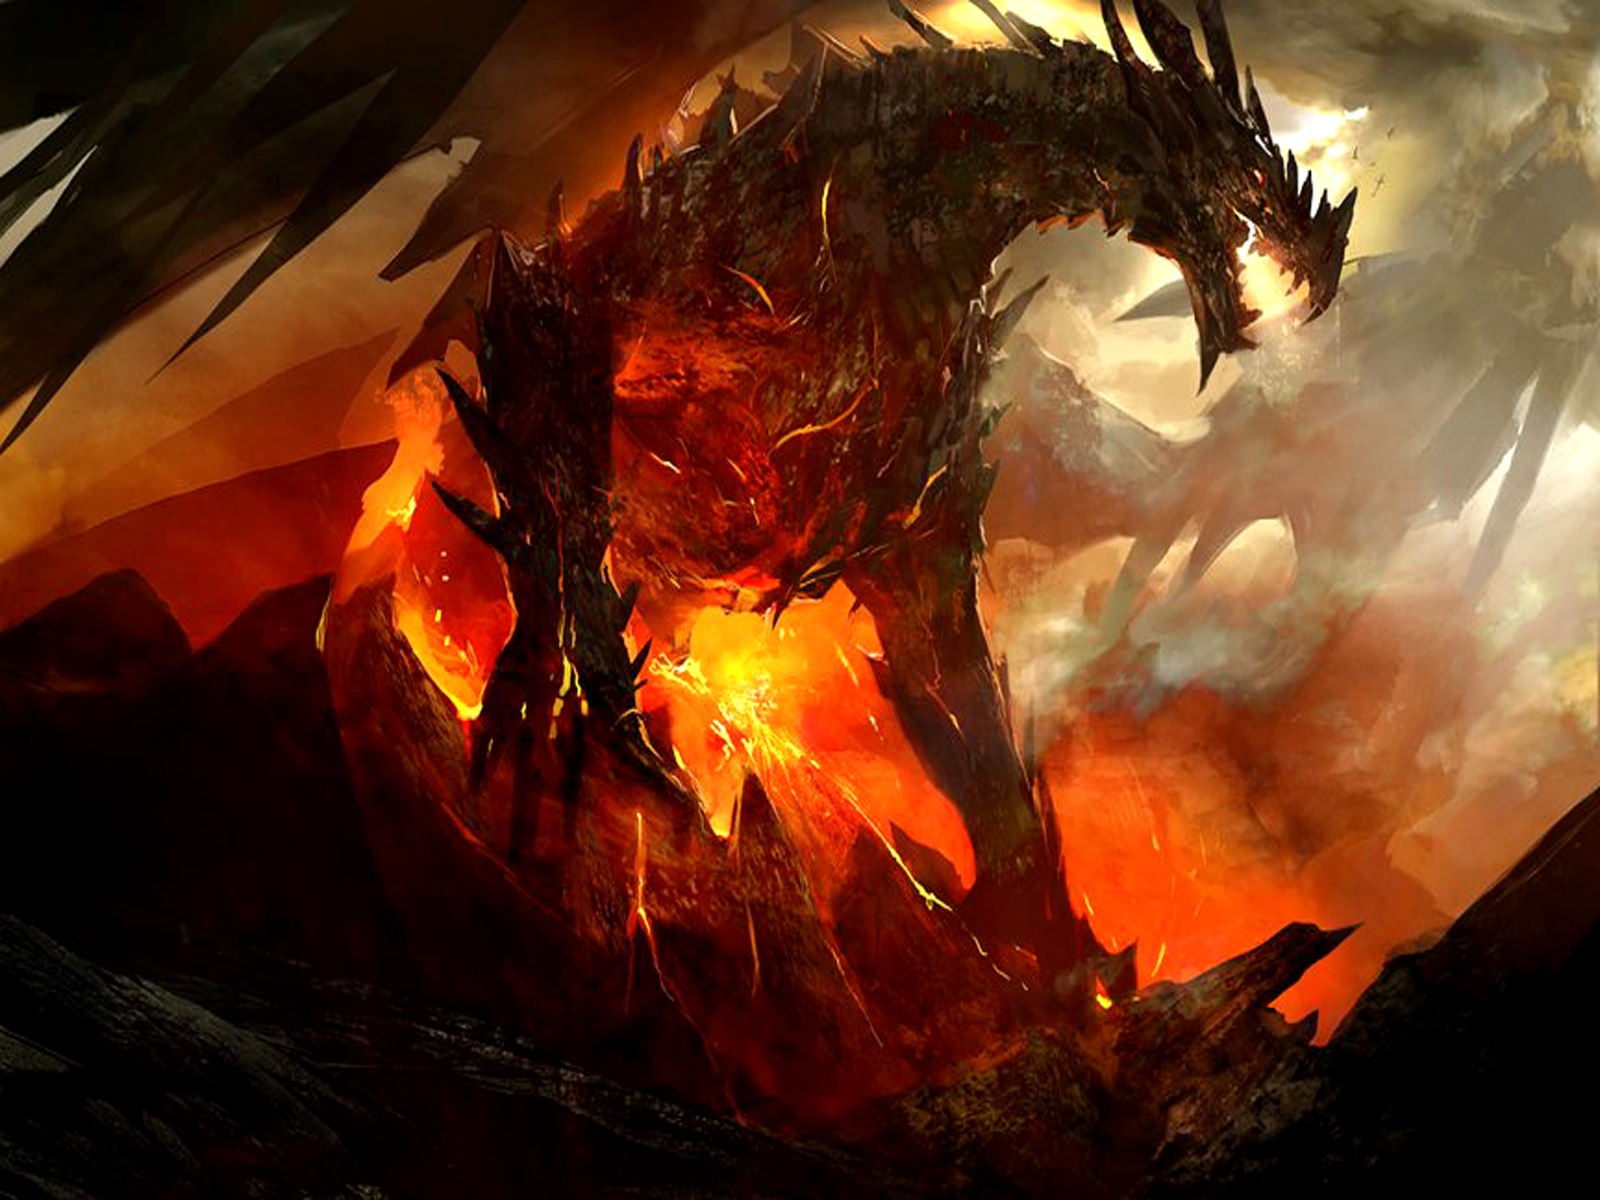 48+] Dragon Wallpapers Free Download on